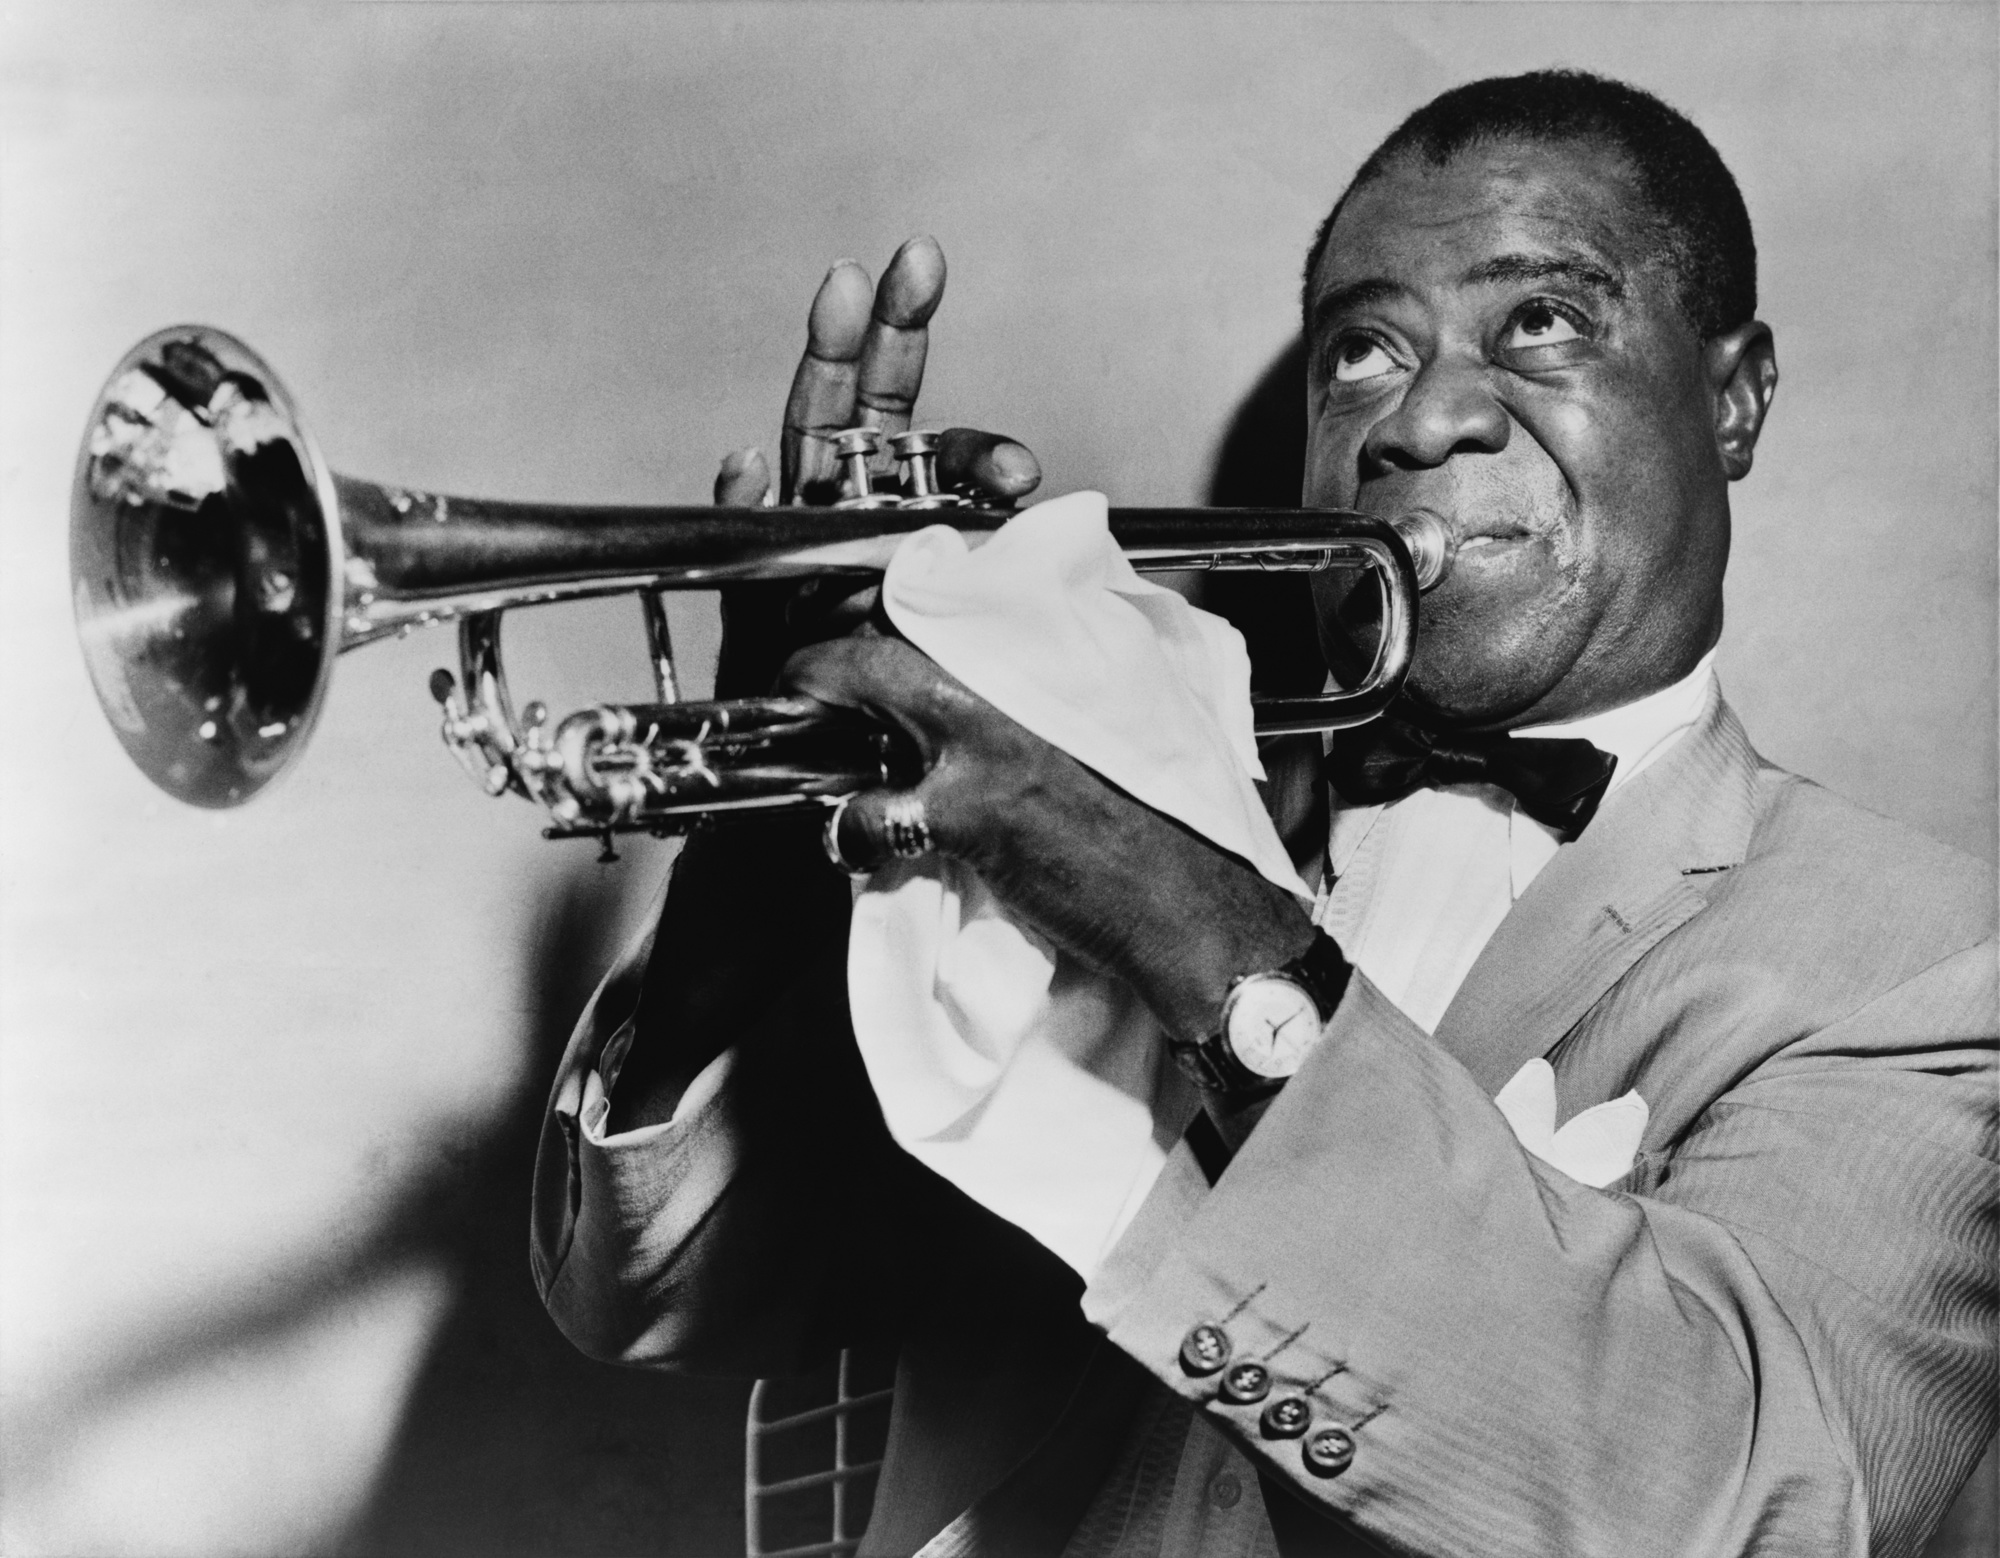 Louis Armstrong observed his birthday on July 4 and claimed that he was born in the year 1900, but his actual birthdate is August 4, 1901. The New York Times hinted at poetic license as the reason for this discrepancy.